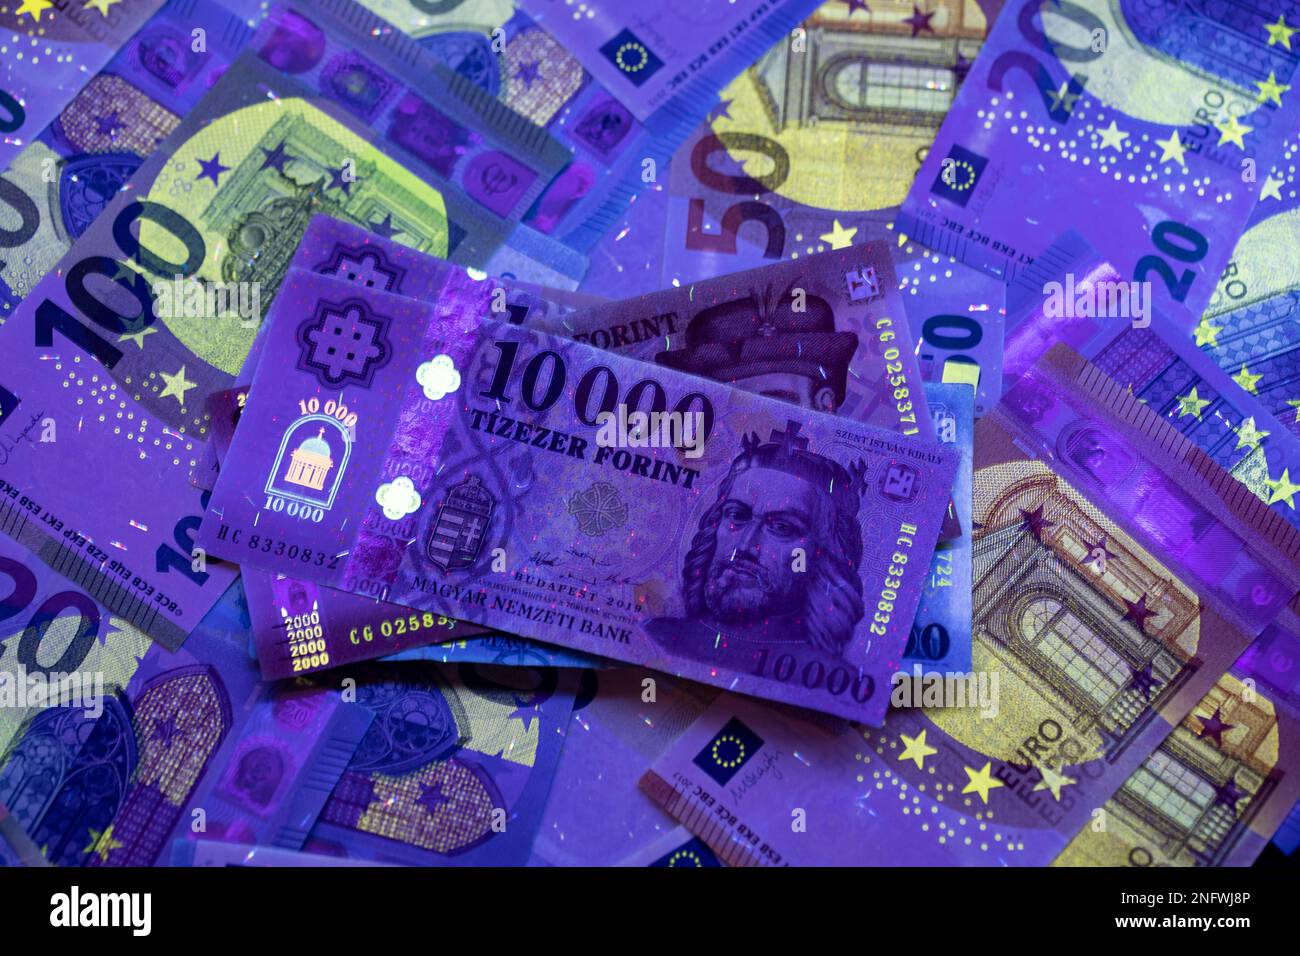 To verify the authenticity of the money. 20,000 HUF banknote in UV light, euro banknotes in the background. The image may contain noise and grain. Stock Photo